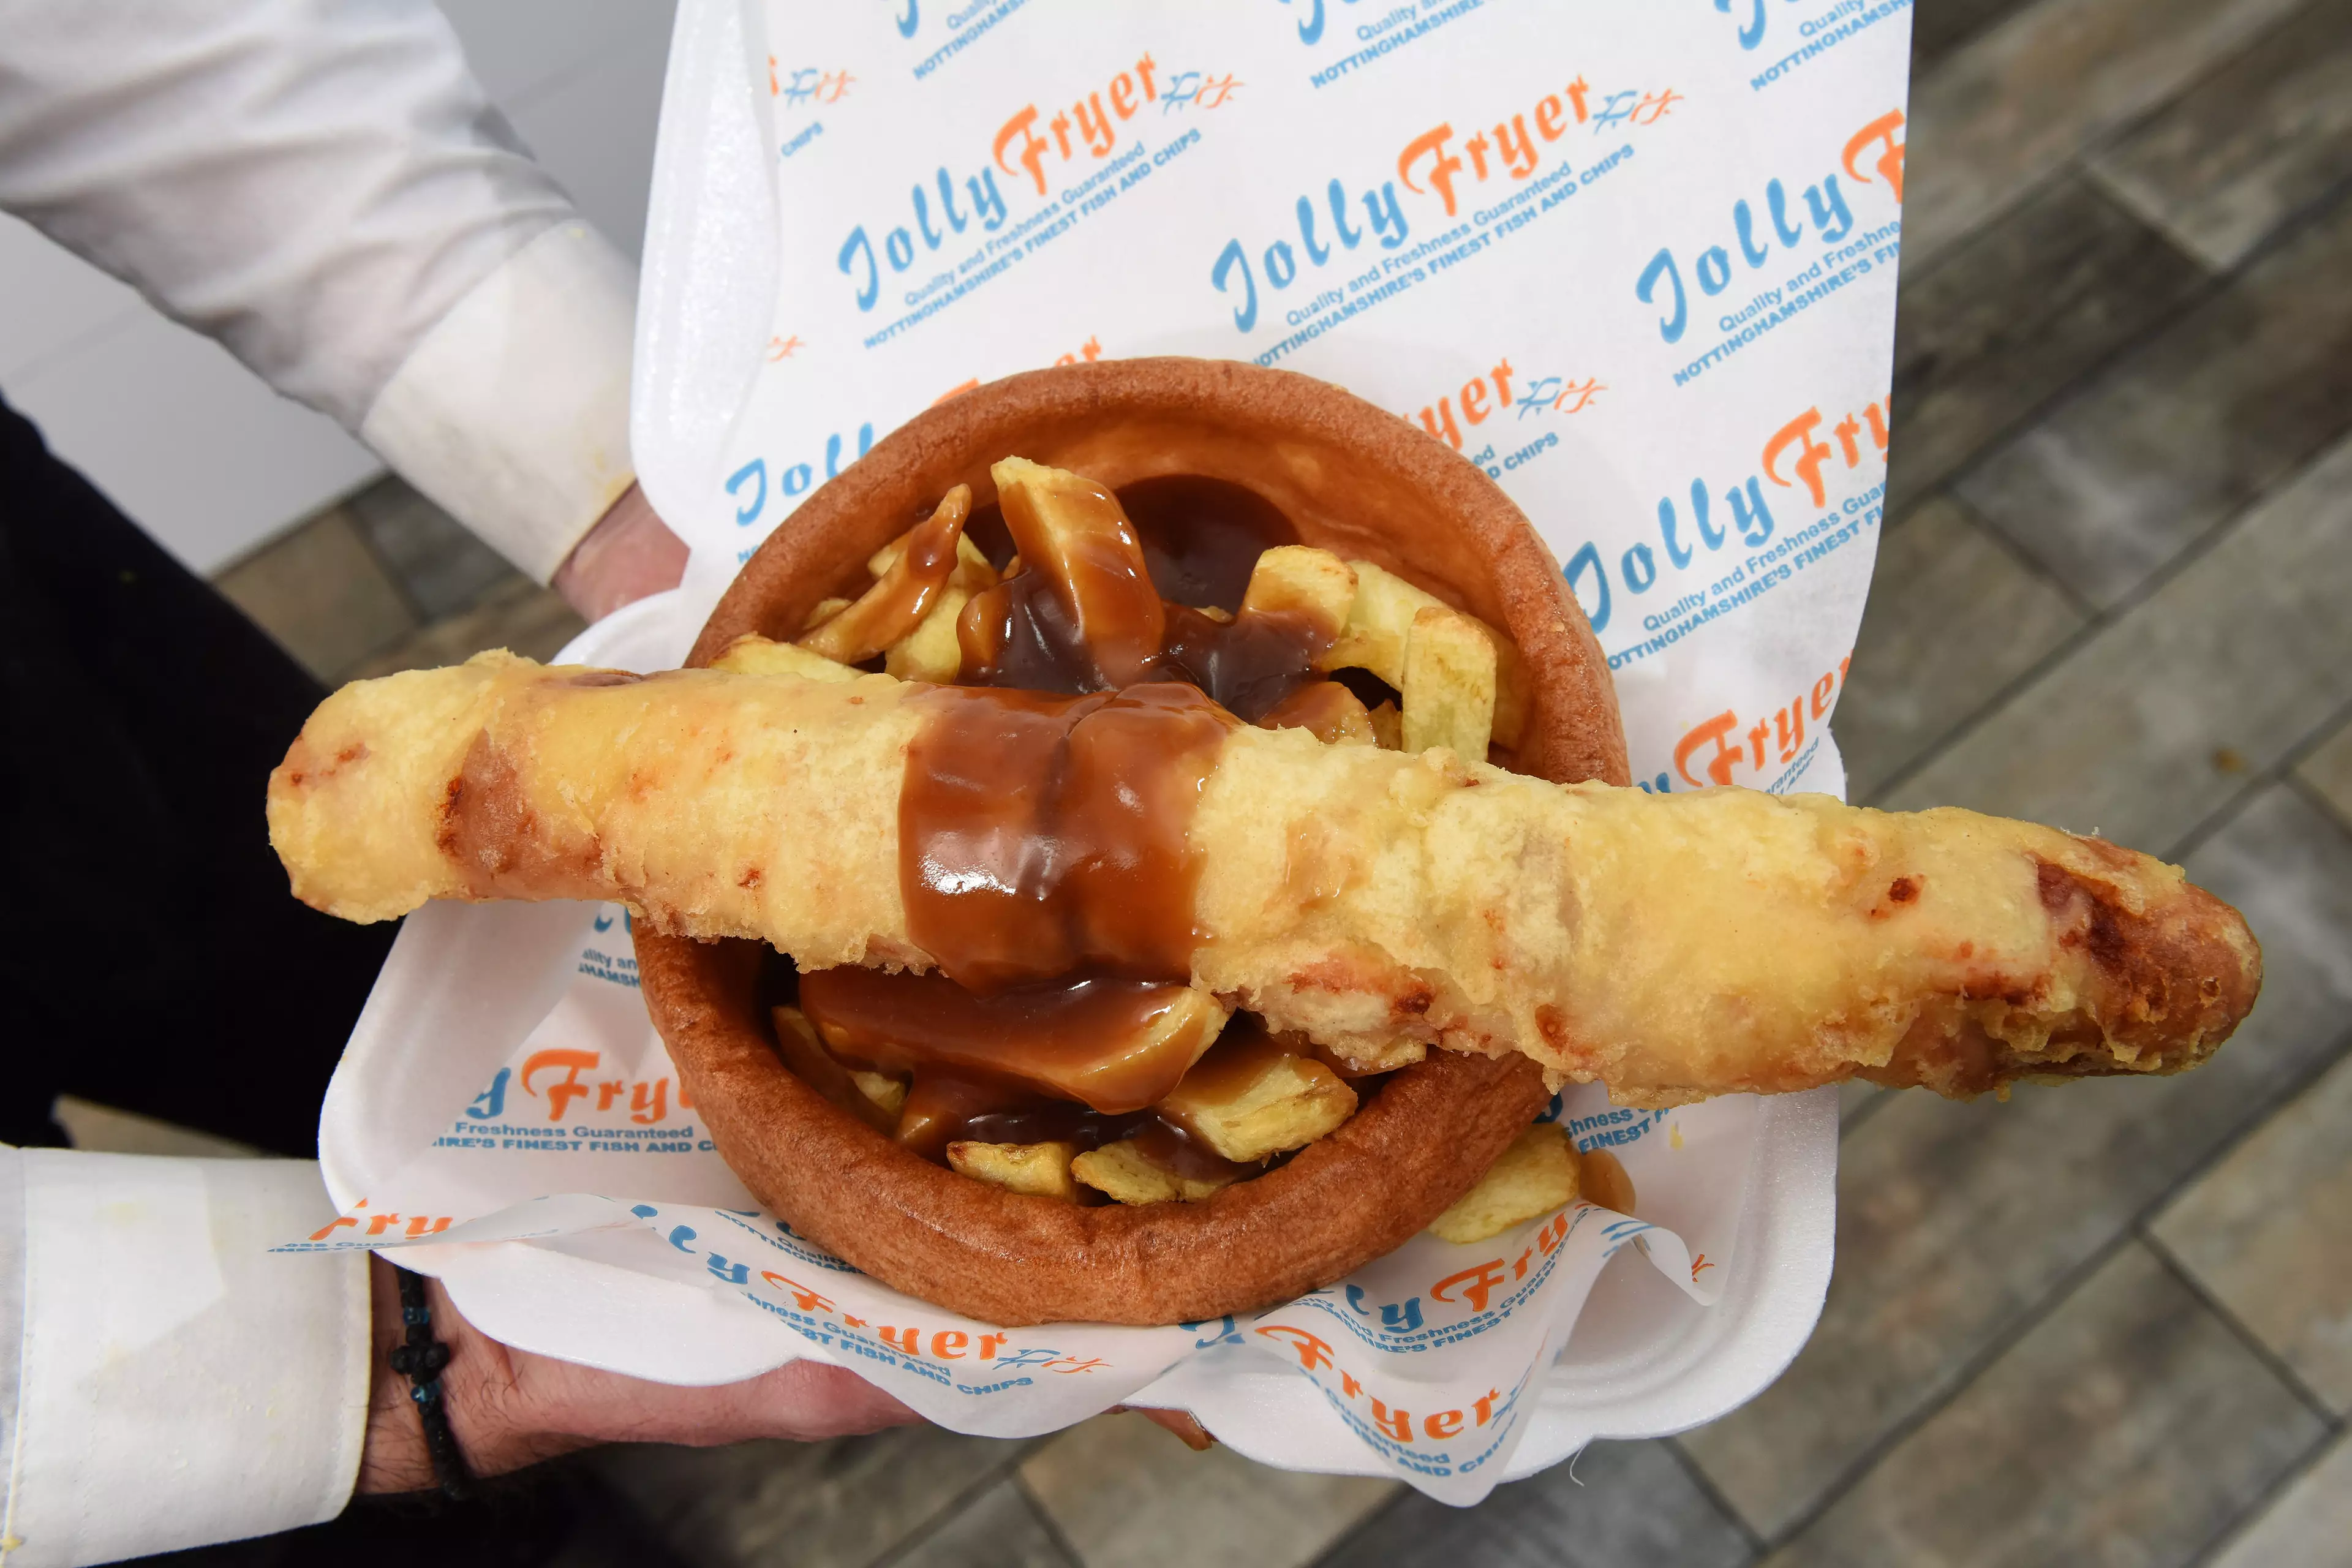 The foot-long sausage is also served with a giant Yorkshire pudding, chips and gravy (